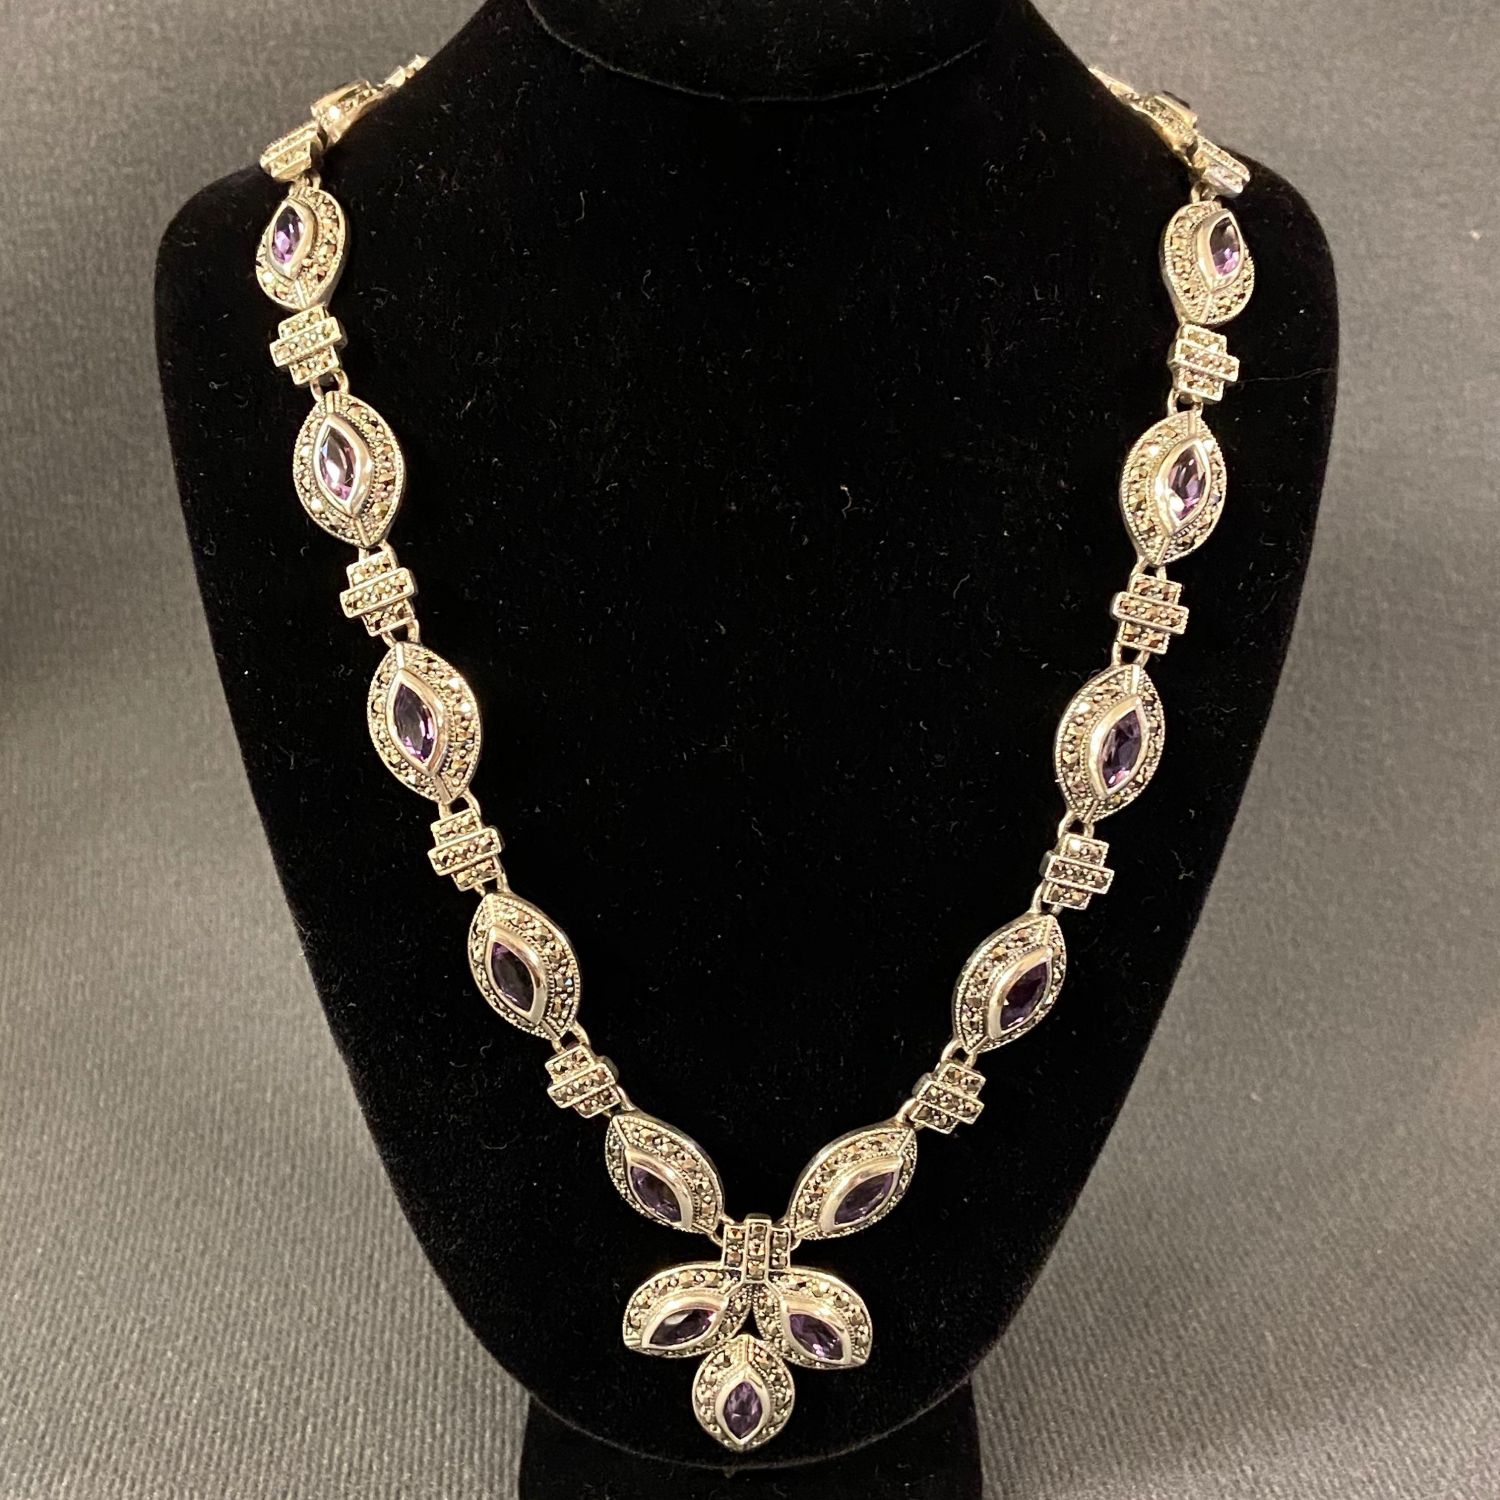 Vintage Silver Amethyst and Marcasite Necklace - Jewellery & Gold ...